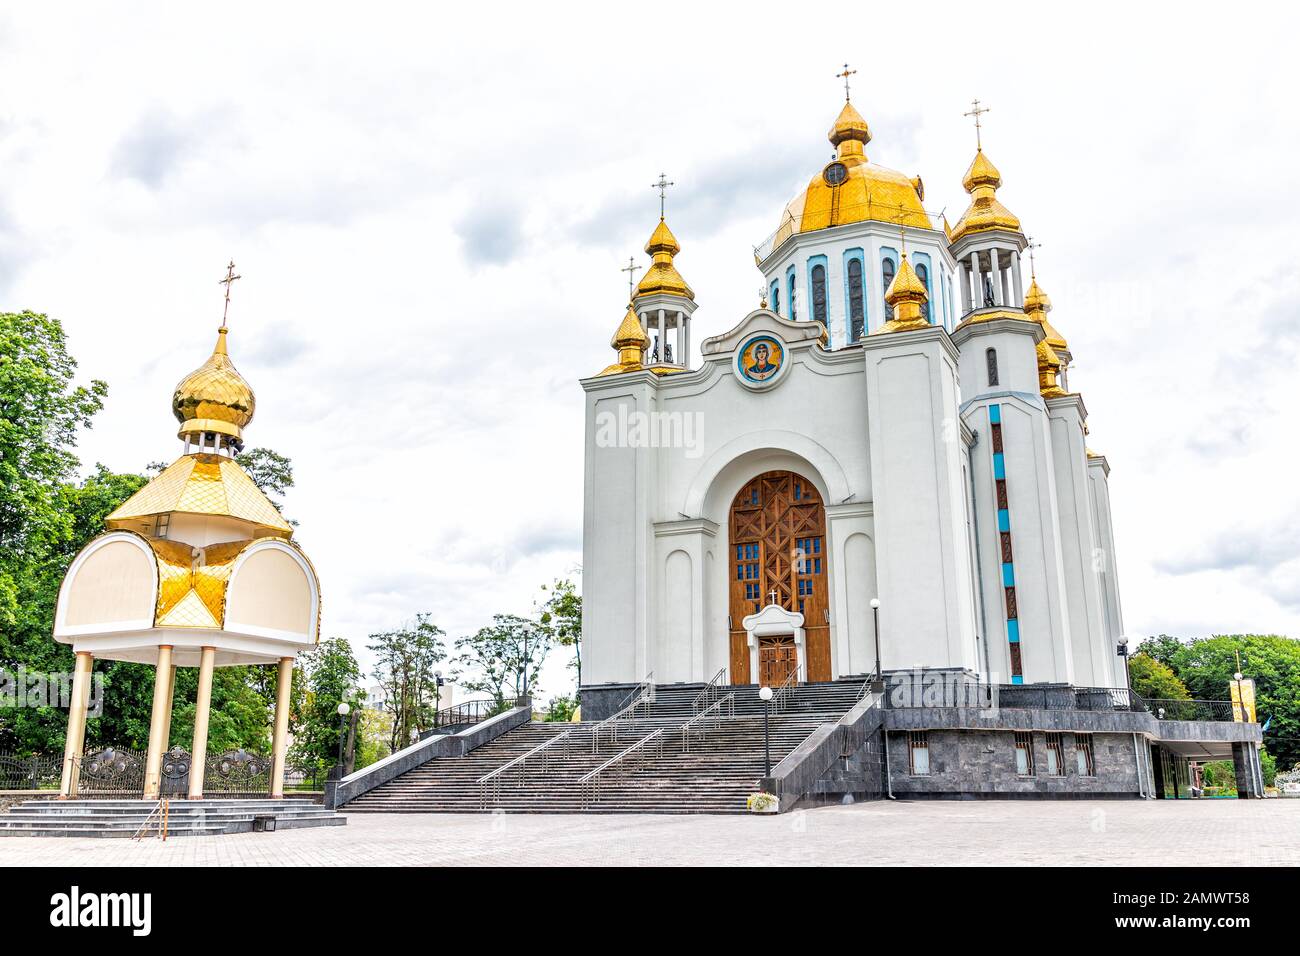 Rivne, Ukraine - July 3, 2018: Soborna and Lypnya street in Rovno city town in western Ukraine, outdoor park in summer, St Basil Cathedral UOC-KP Stock Photo